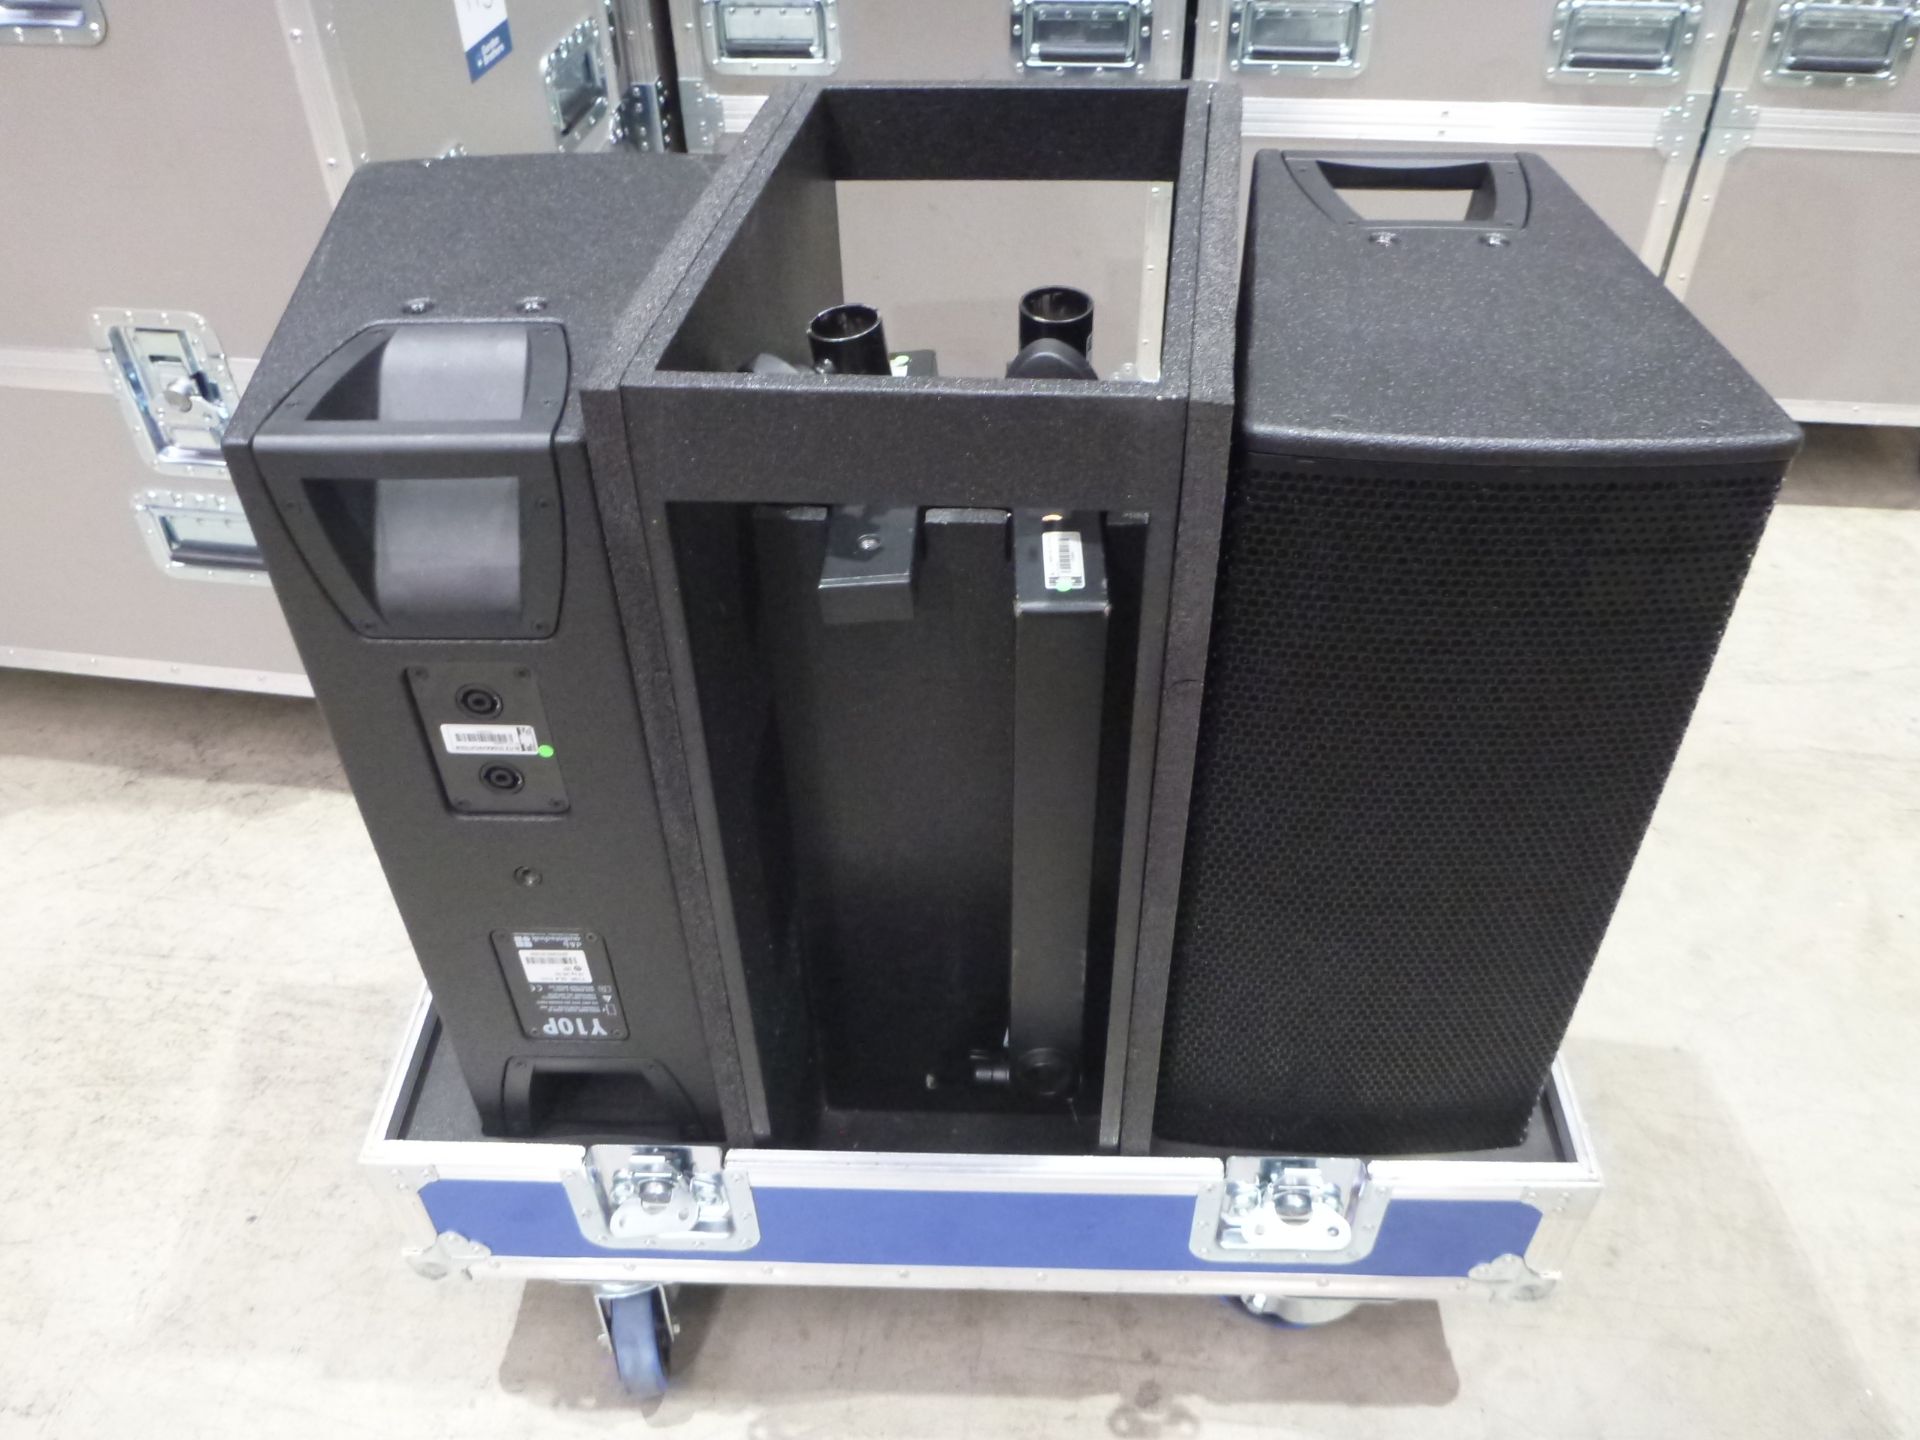 D & B Audiotecknik Y10P Loudspeakers (Pair) In flight case with flying frame, top hat and safety - Image 4 of 8